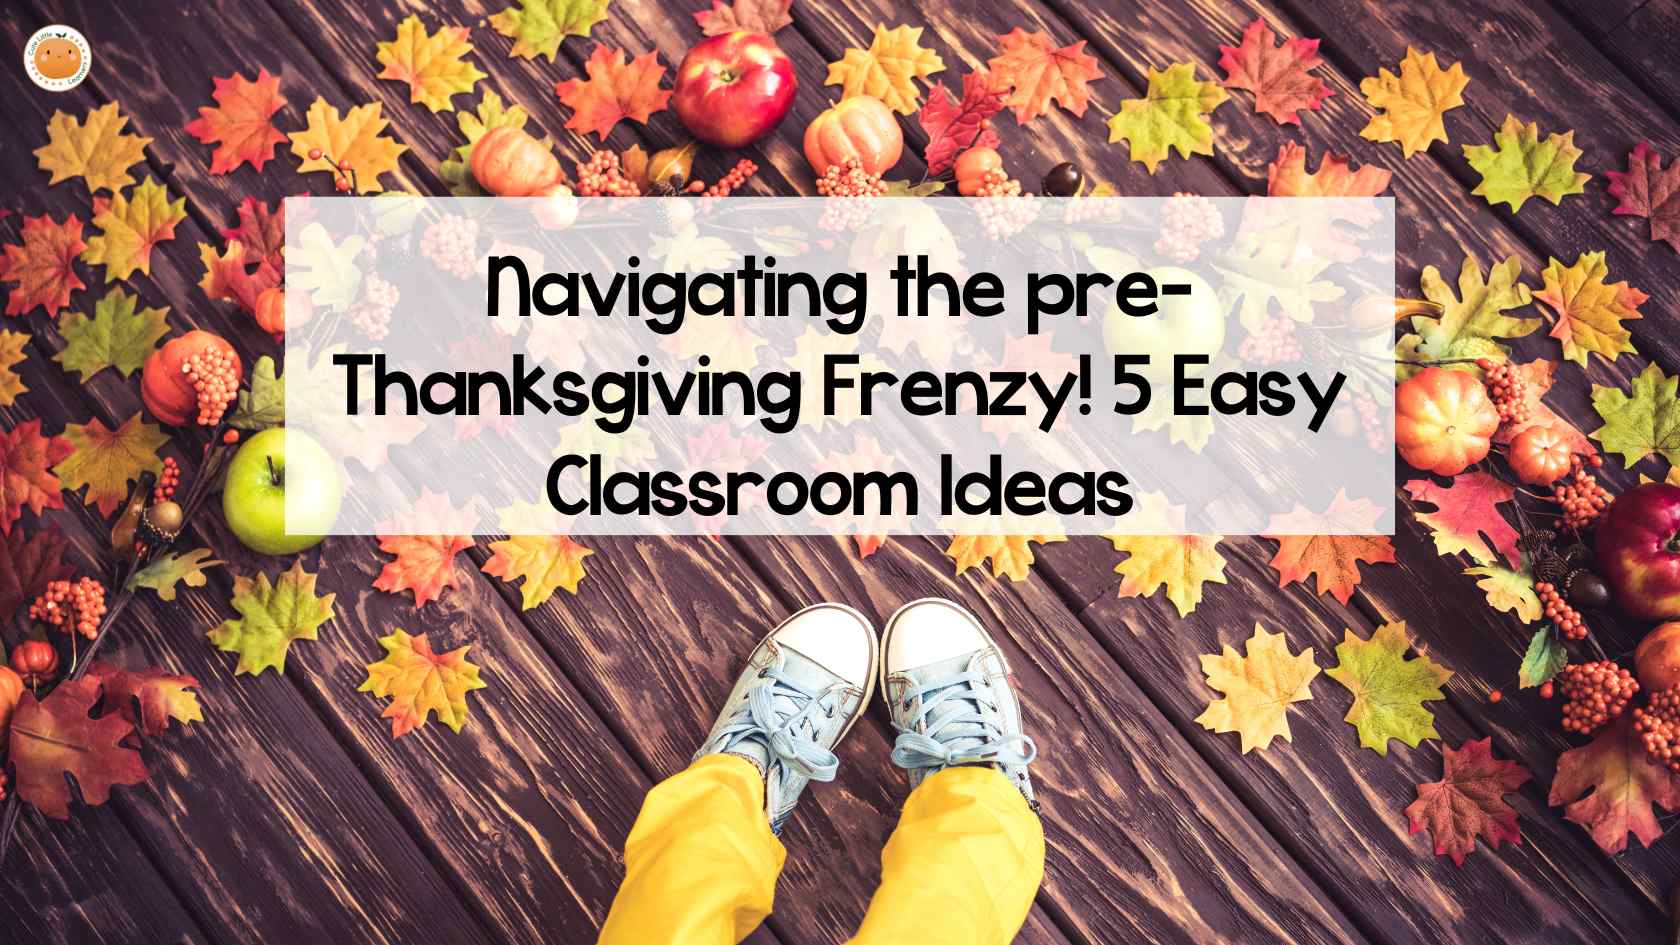 Navigating the pre-Thanksgiving Frenzy: 5 Easy Classroom Ideas